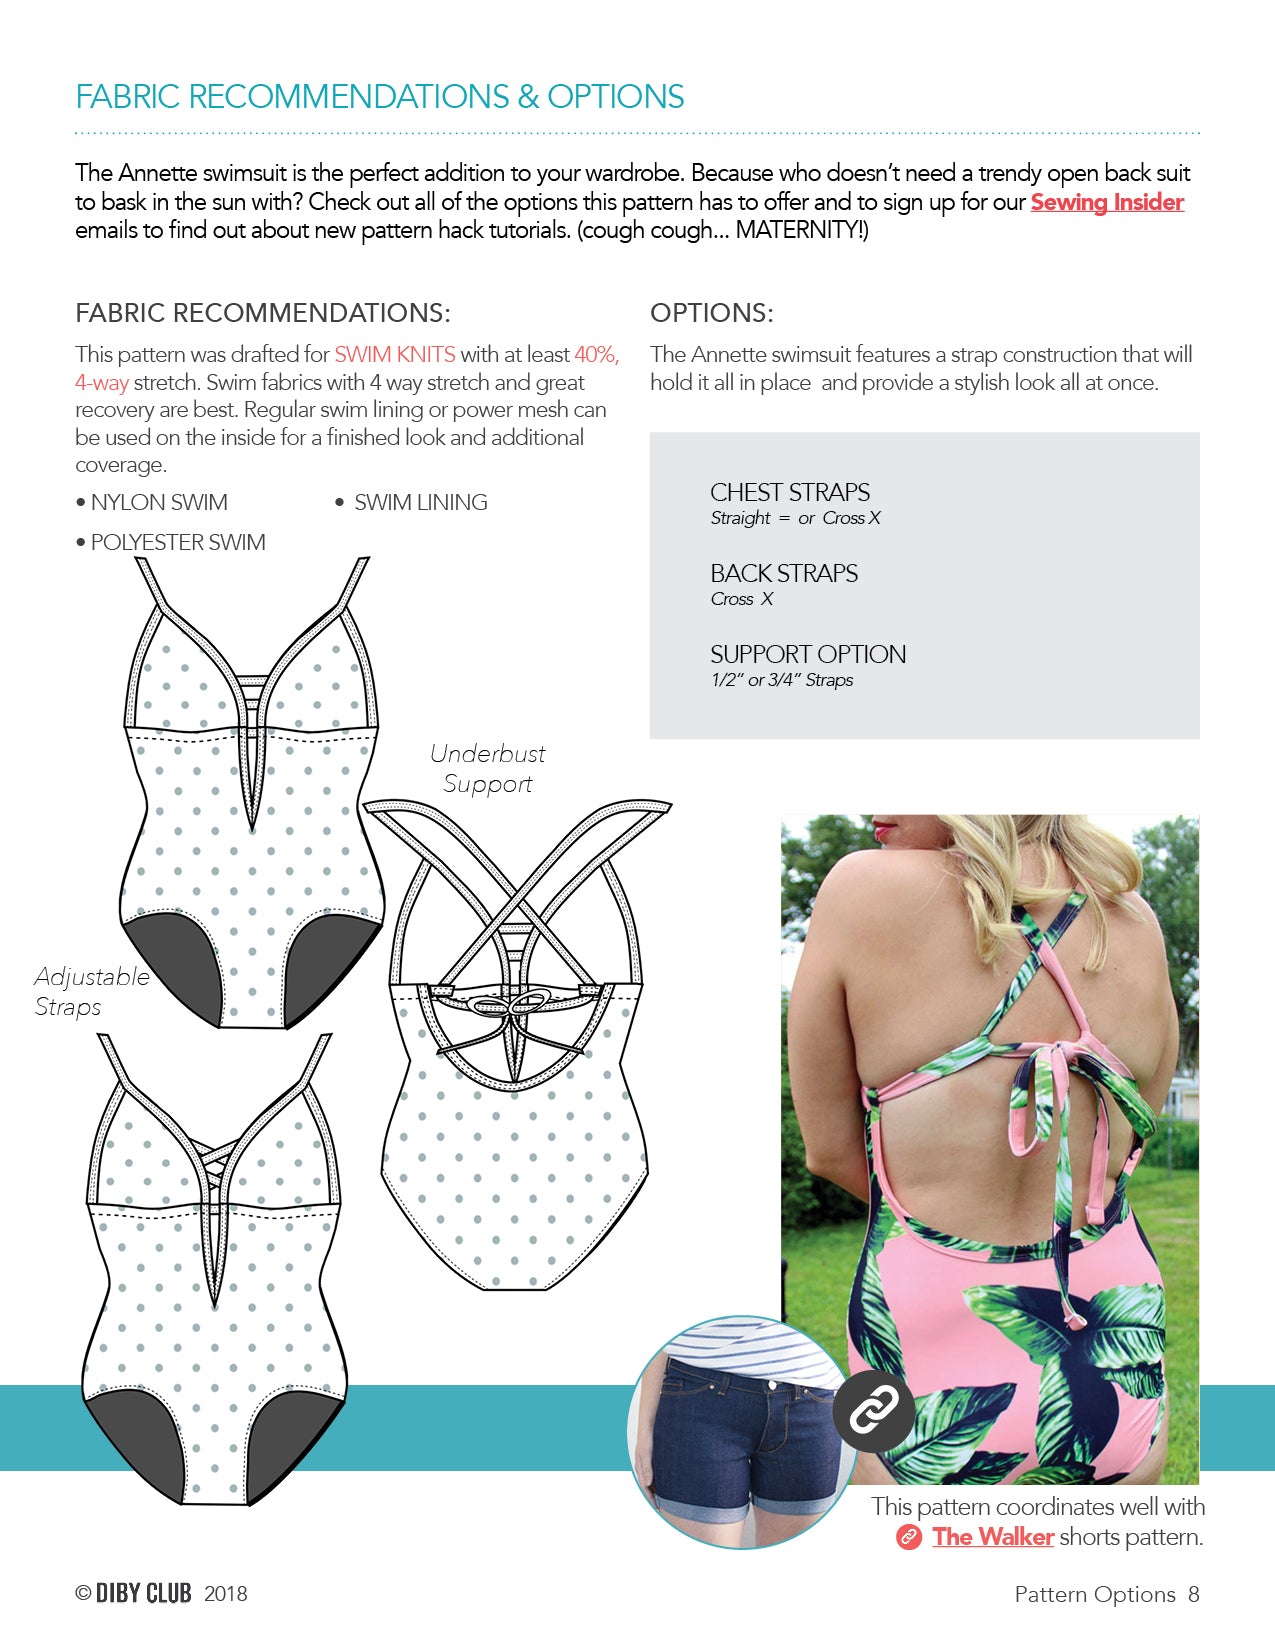 Fabric recommendations and pattern options for the Annette swimsuit. 